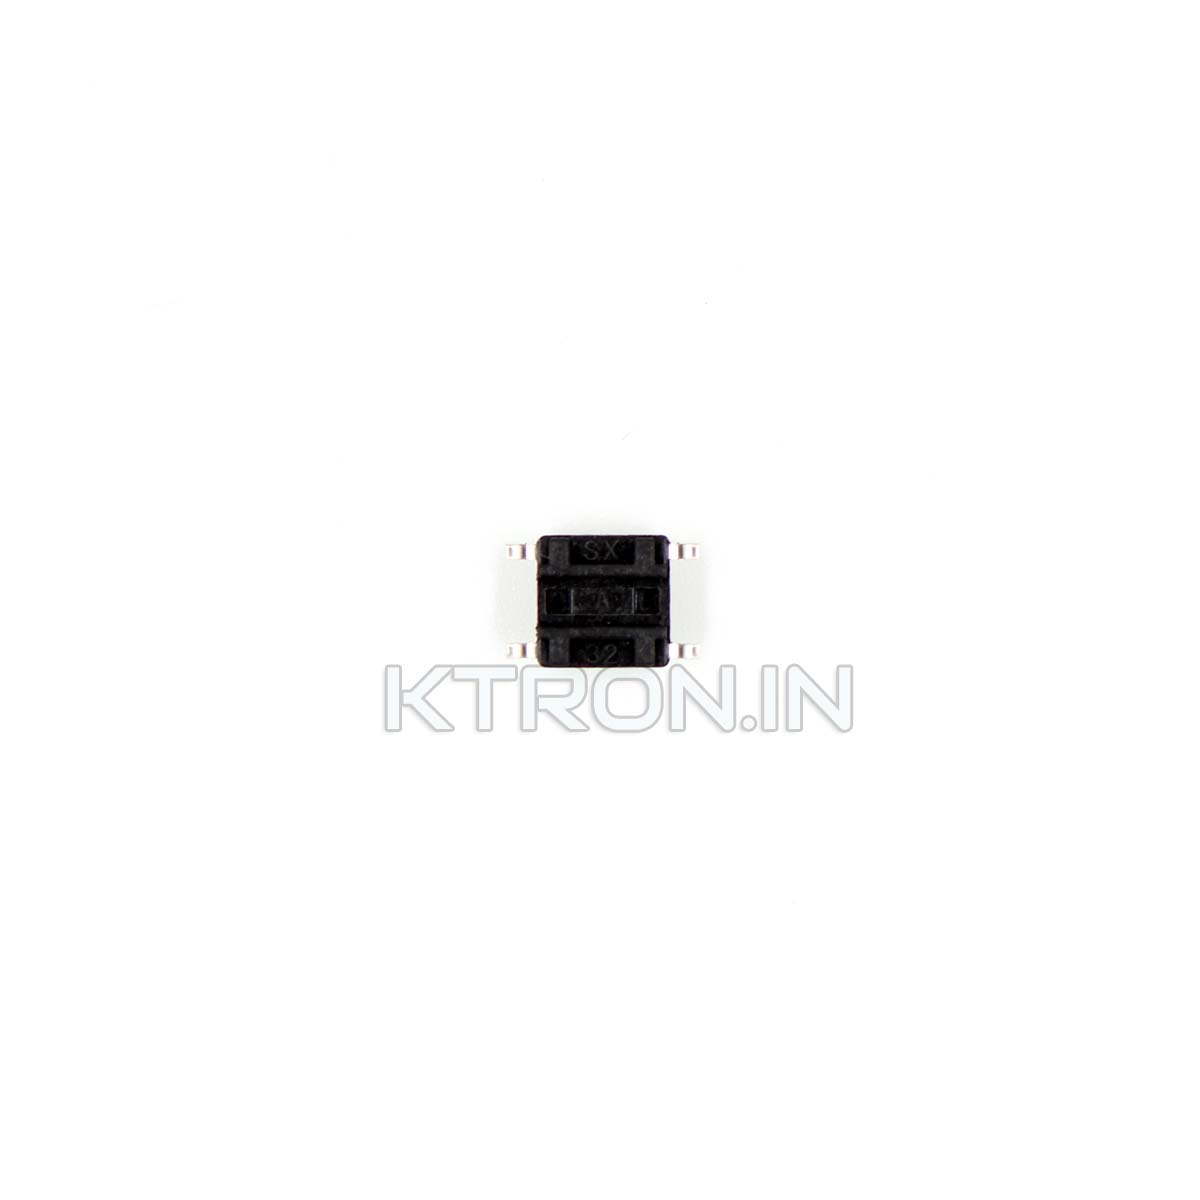 Buy 6x6x4mm SMD Tactile Switch - KTRON India